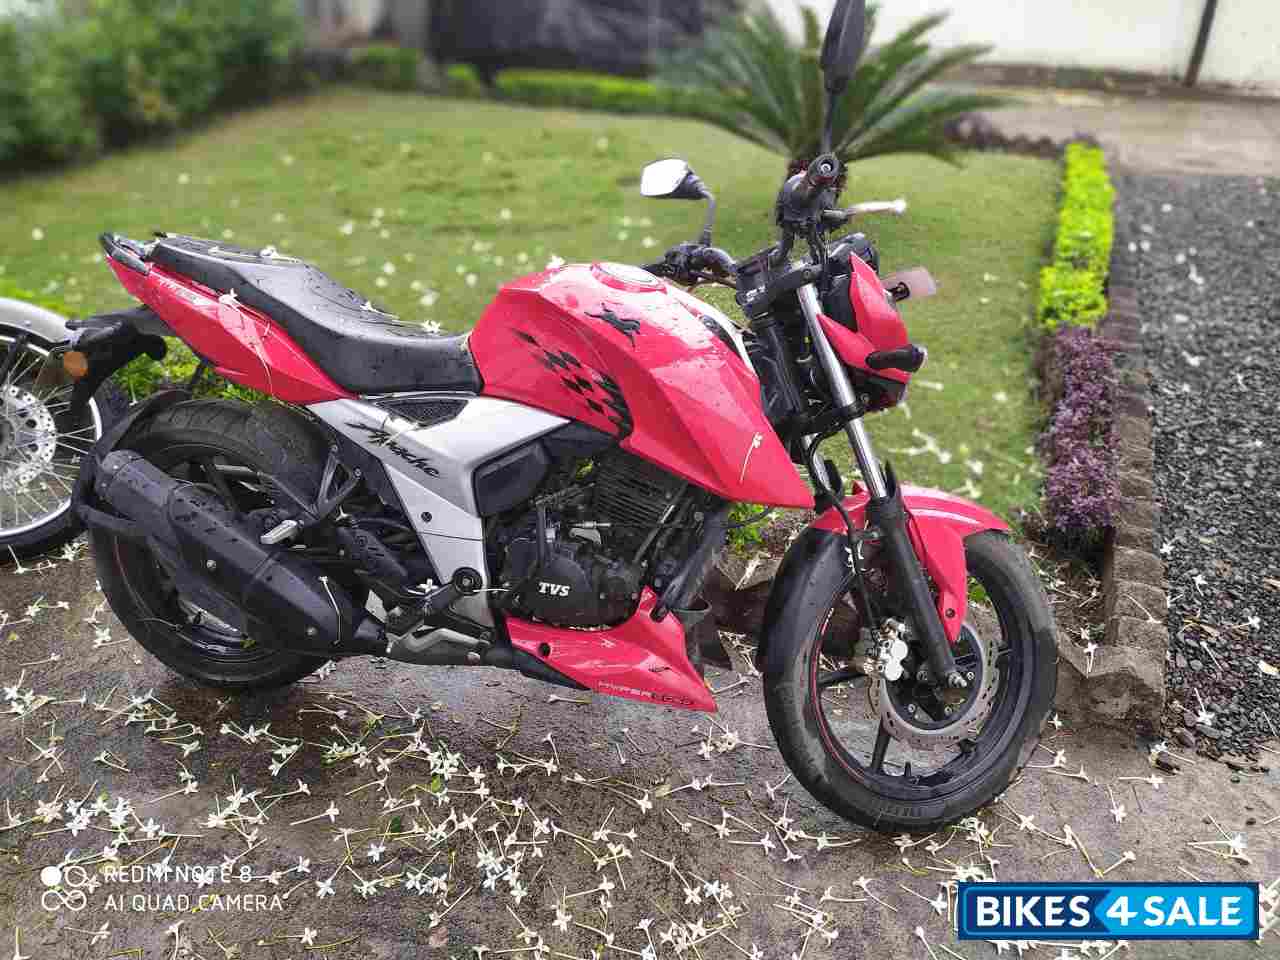 Used 19 Model Tvs Apache Rtr 160 4v For Sale In Nagpur Id Bikes4sale